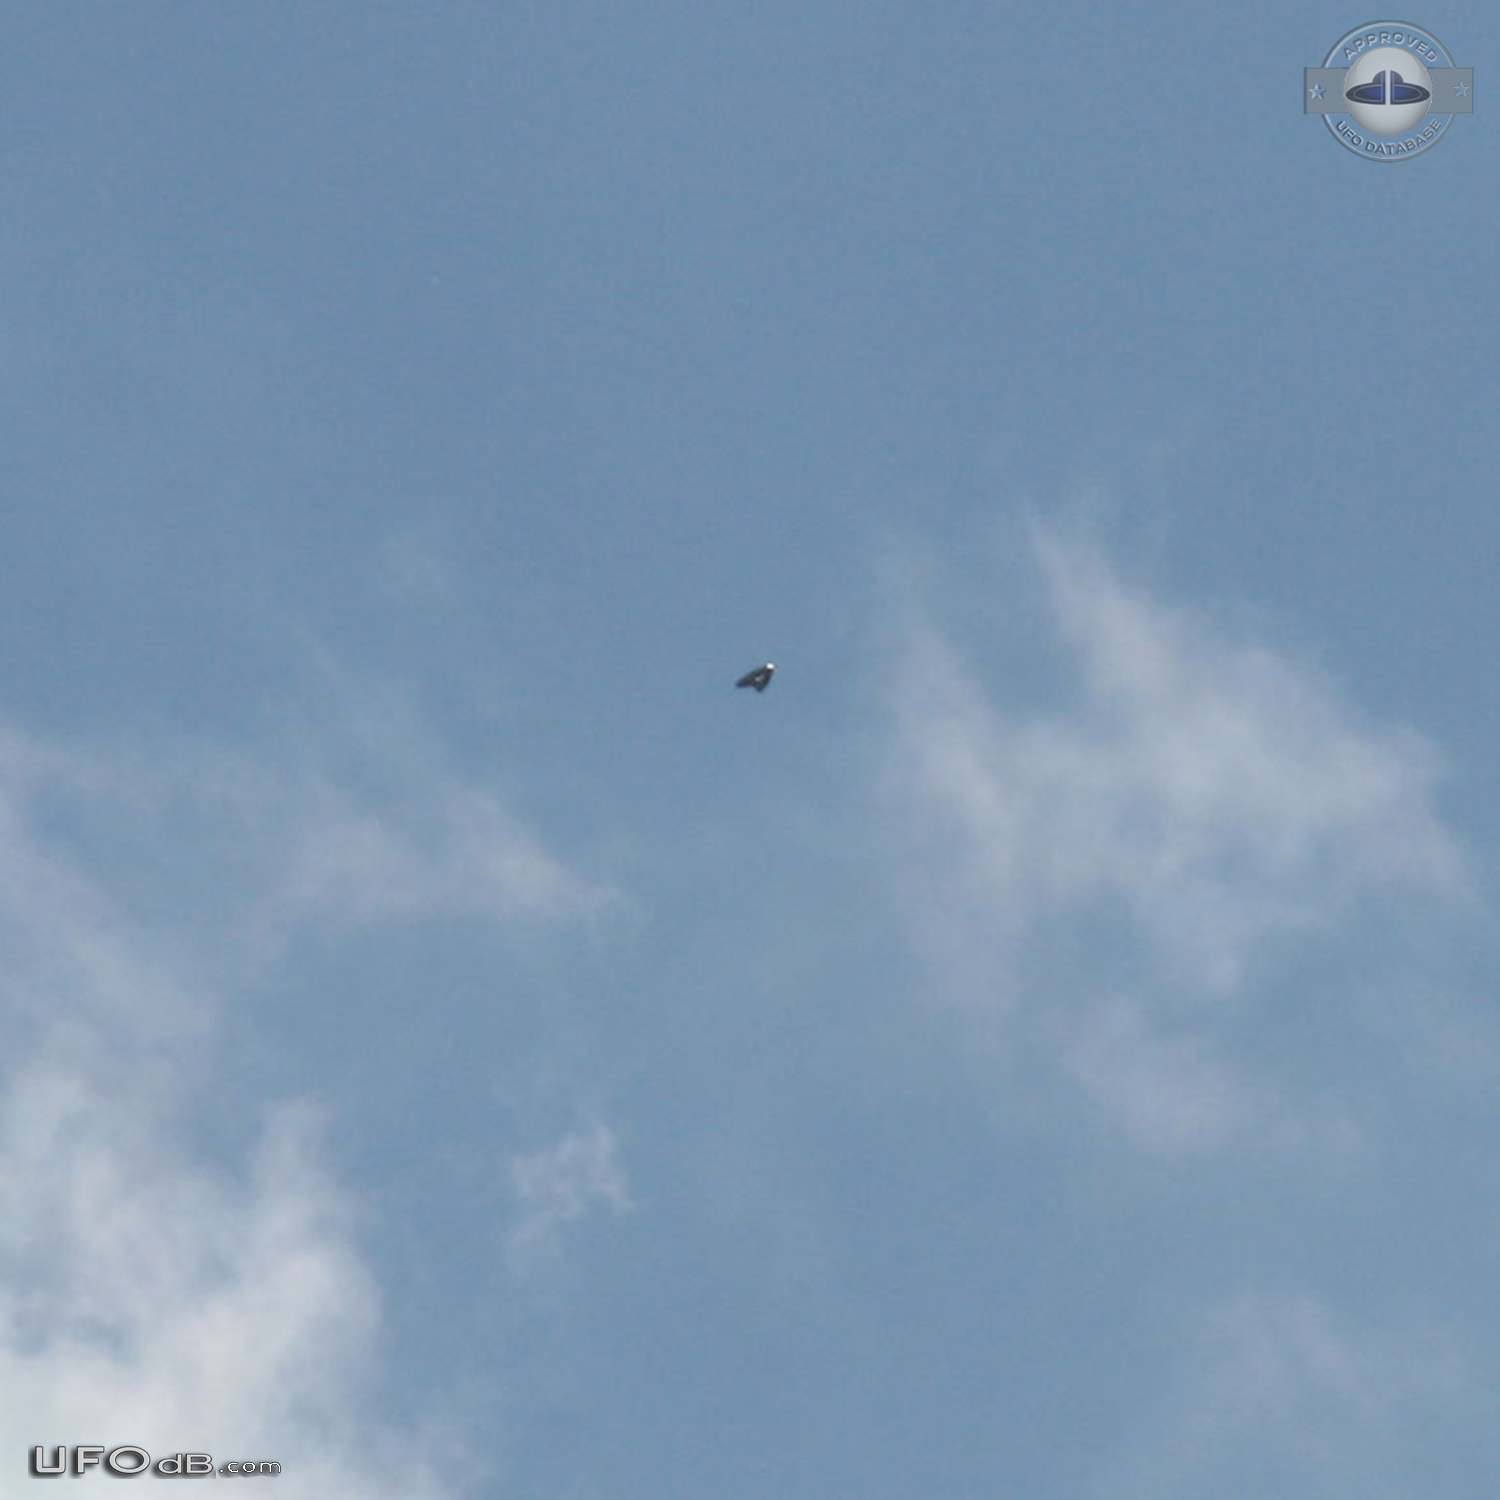 Watched UFO first in the west move quickly through to north east - Gle UFO Picture #740-3